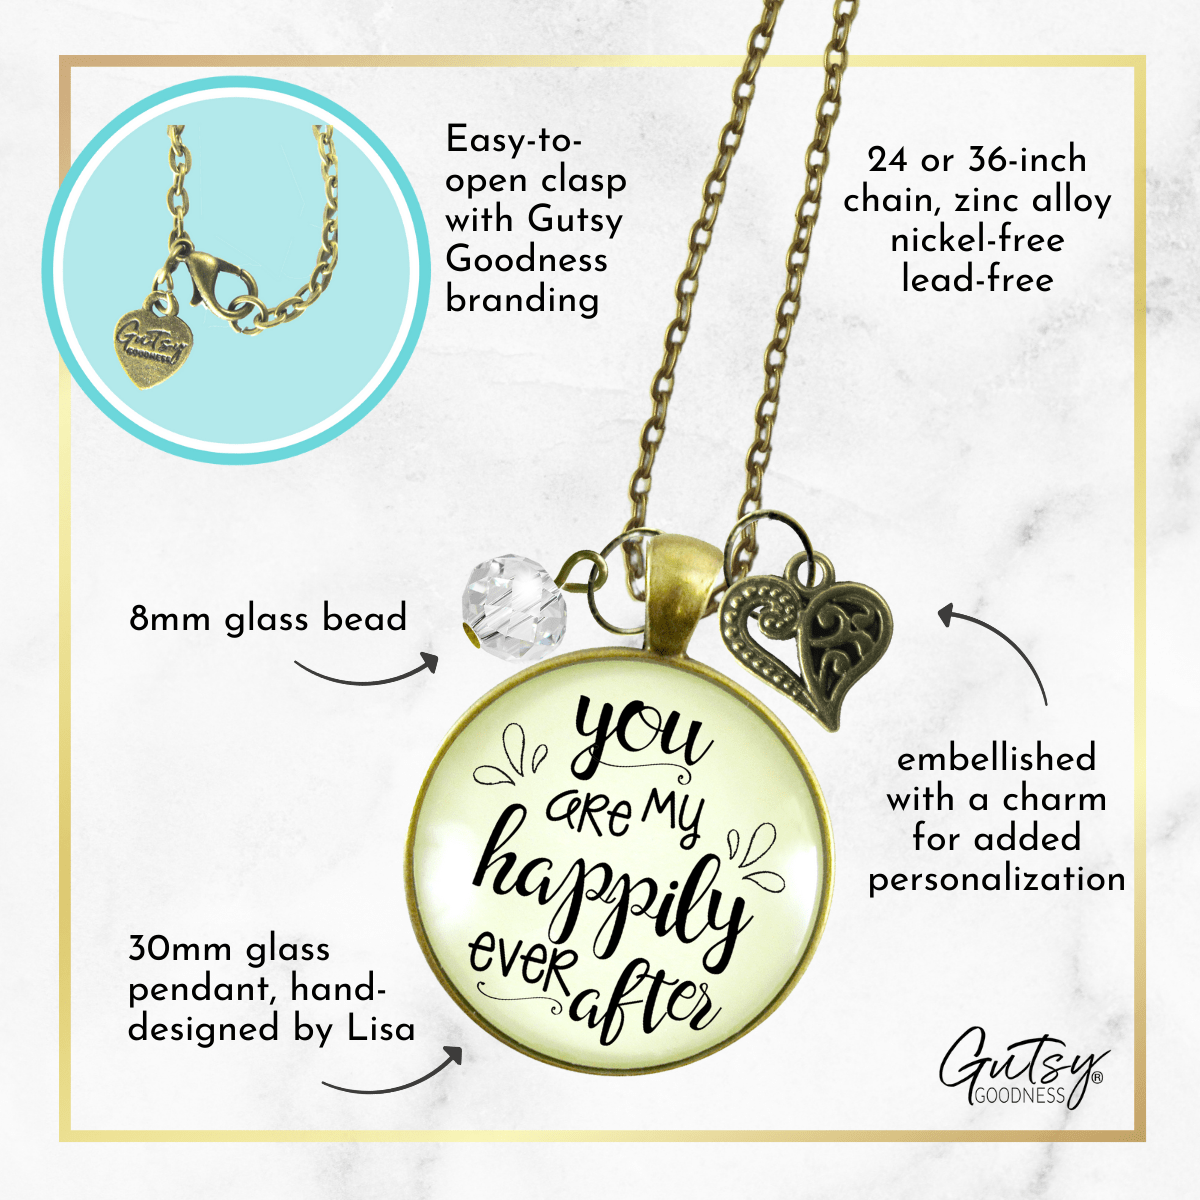 Gutsy Goodness You are My Happily Ever After Necklace Gift Love Quote Jewelry Charm - Gutsy Goodness Handmade Jewelry;You Are My Happily Ever After Necklace Gift Love Quote Jewelry Charm - Gutsy Goodness Handmade Jewelry Gifts